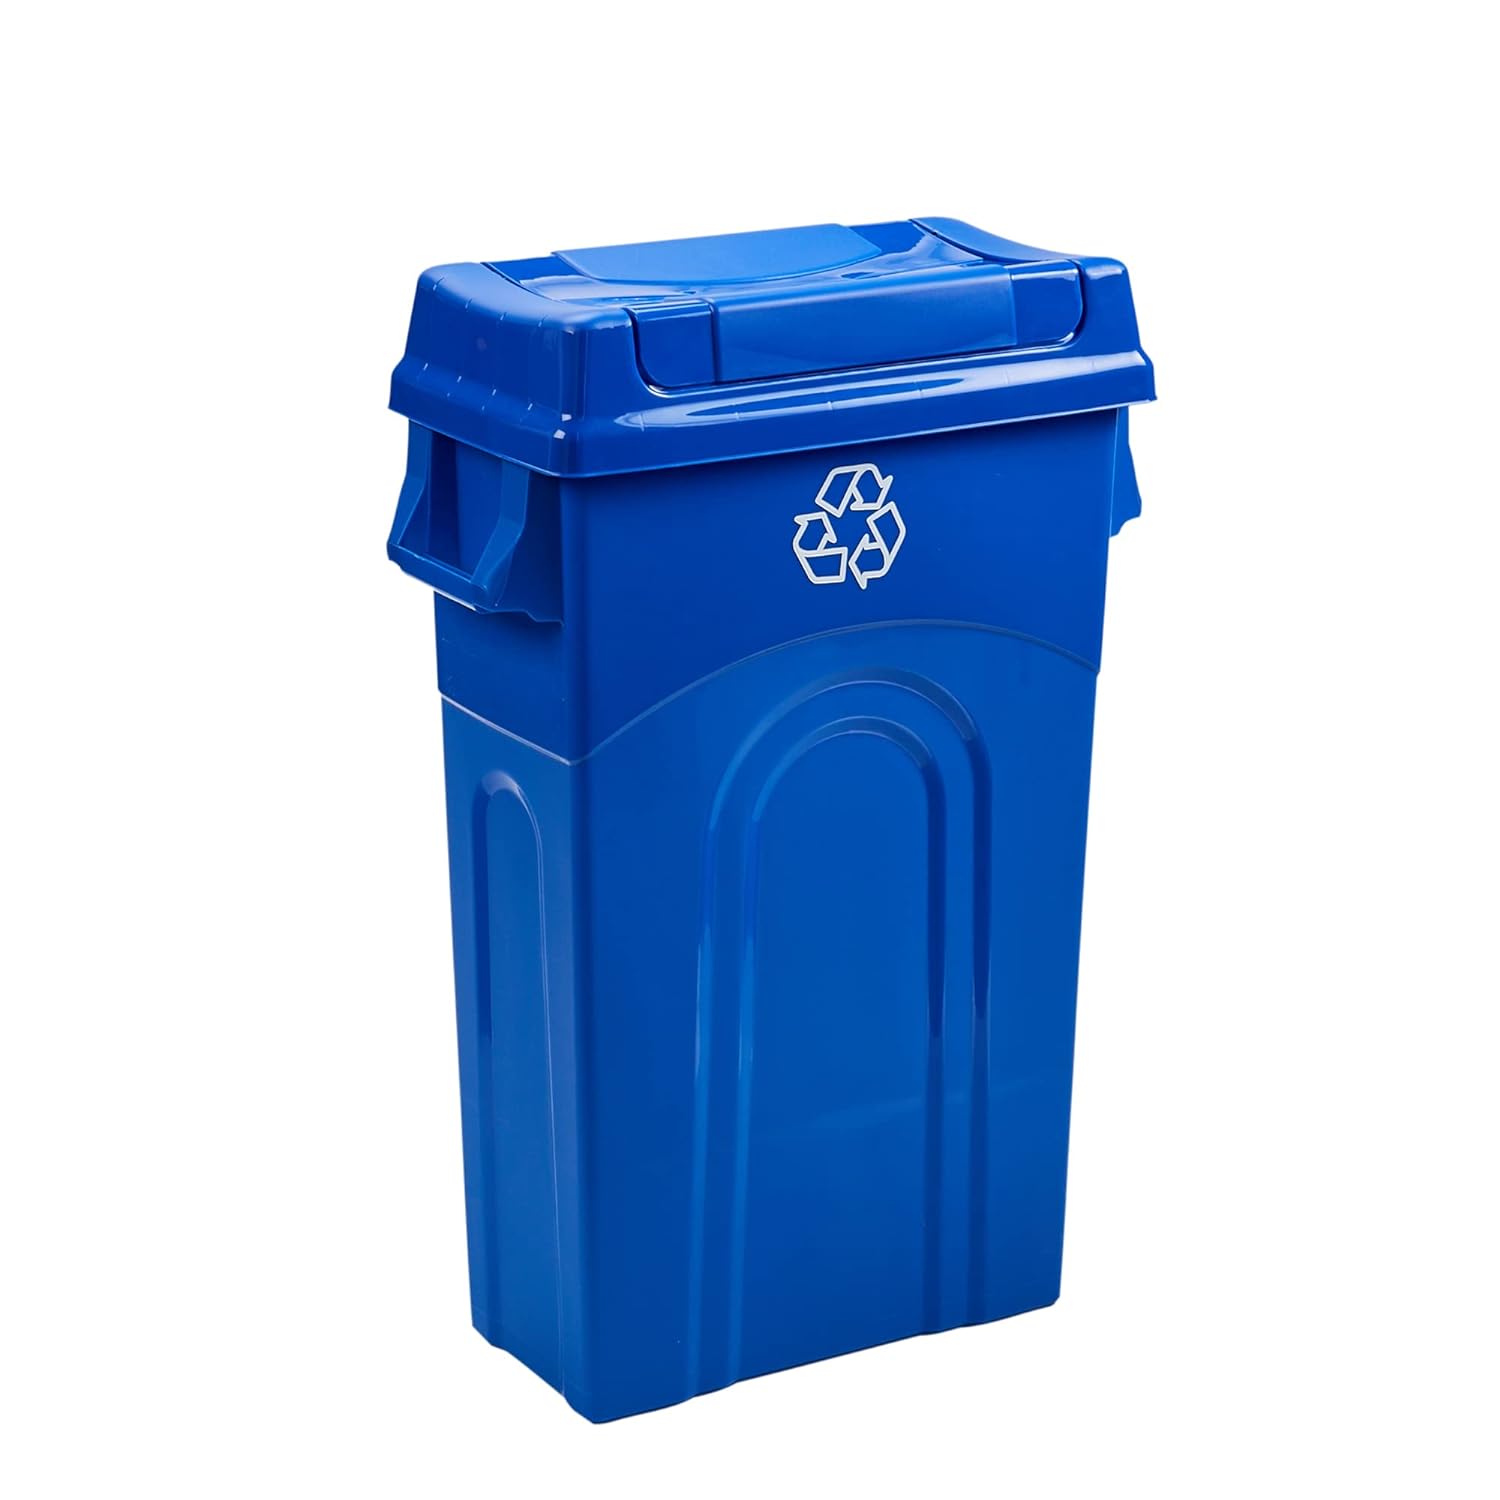 United Solutions Highboy Recycling Bin Review